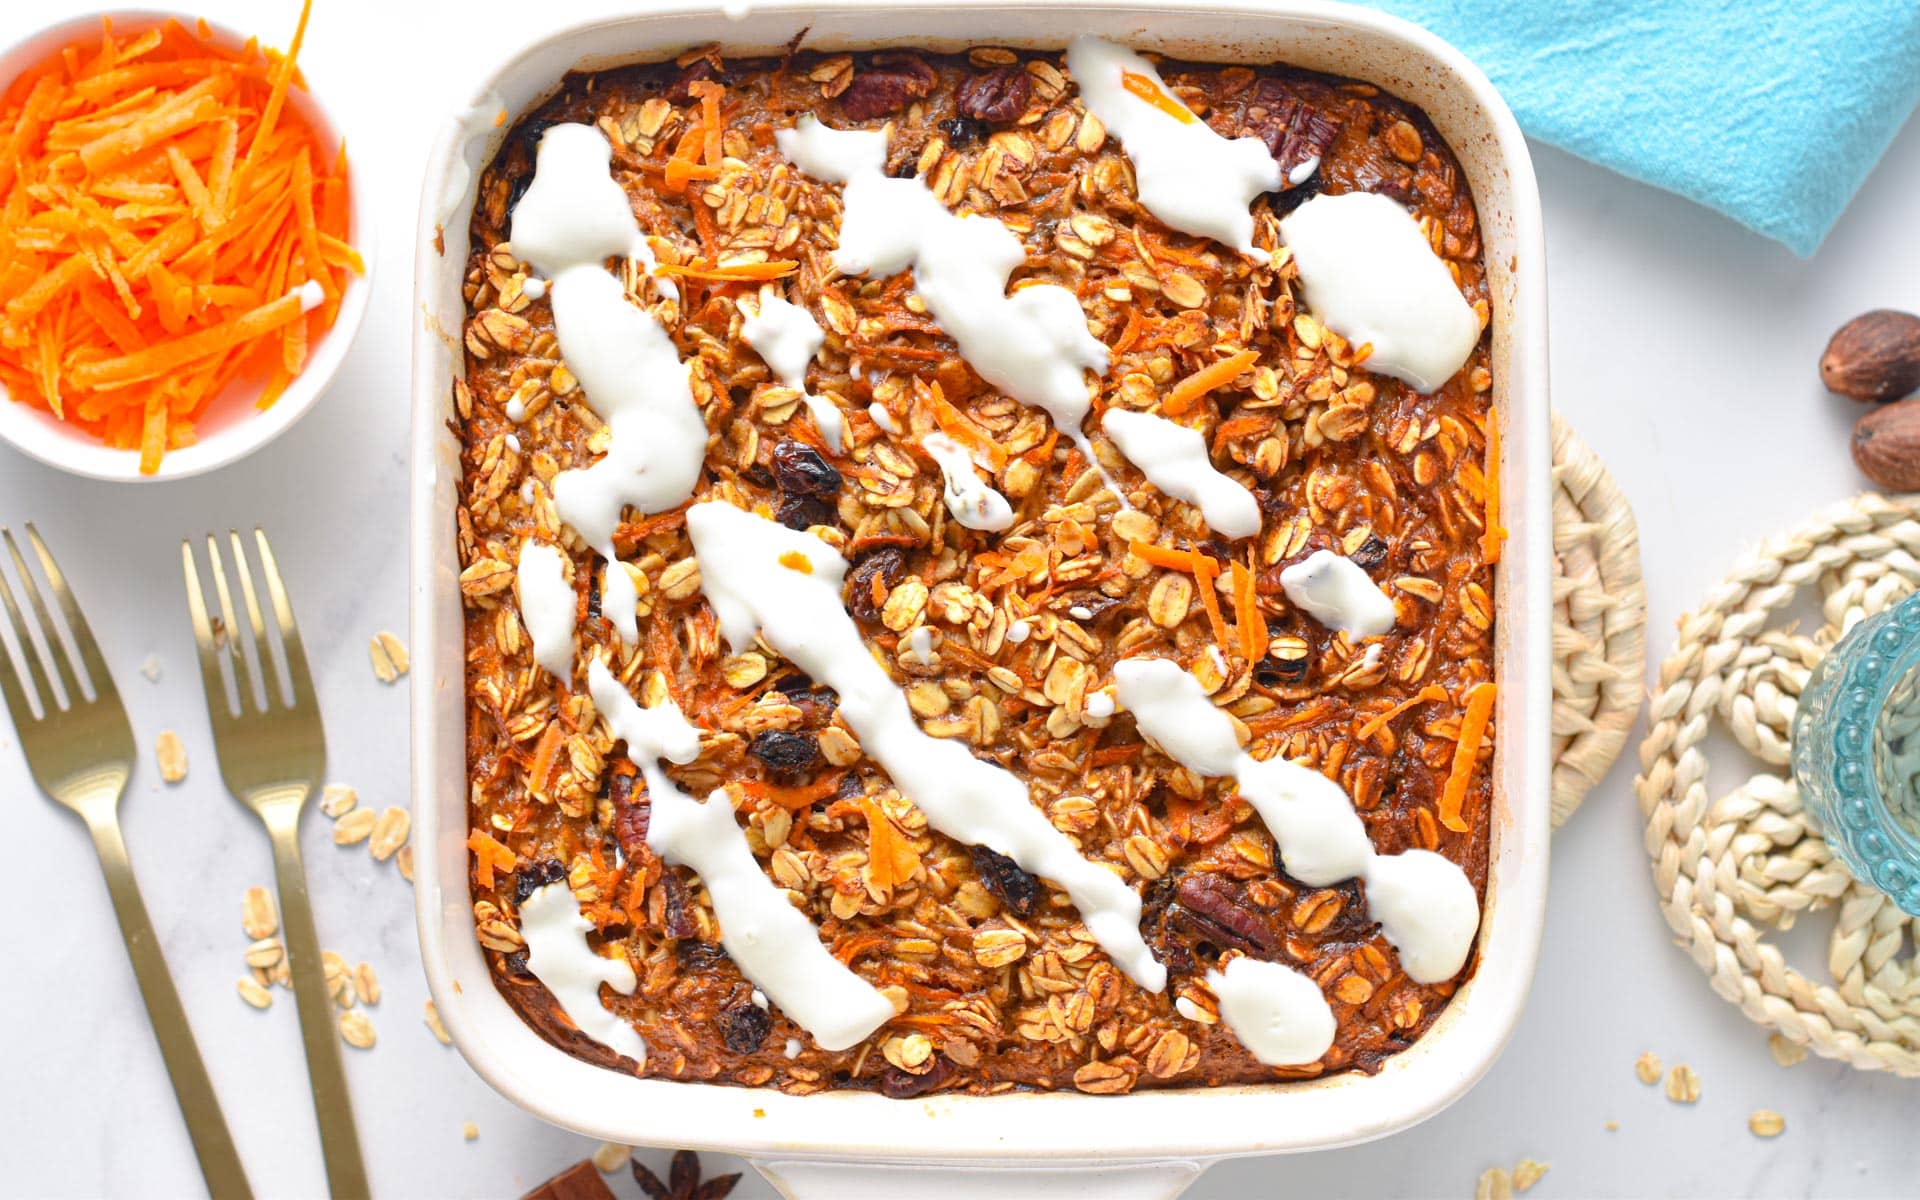 This Carrot Cake Baked Oatmeal is an easy one-pan oatmeal to serve a delicious carrot-cake flavor oatmeal to all the family. It's the easiest healthy breakfast this Easter for carrot cake lovers.